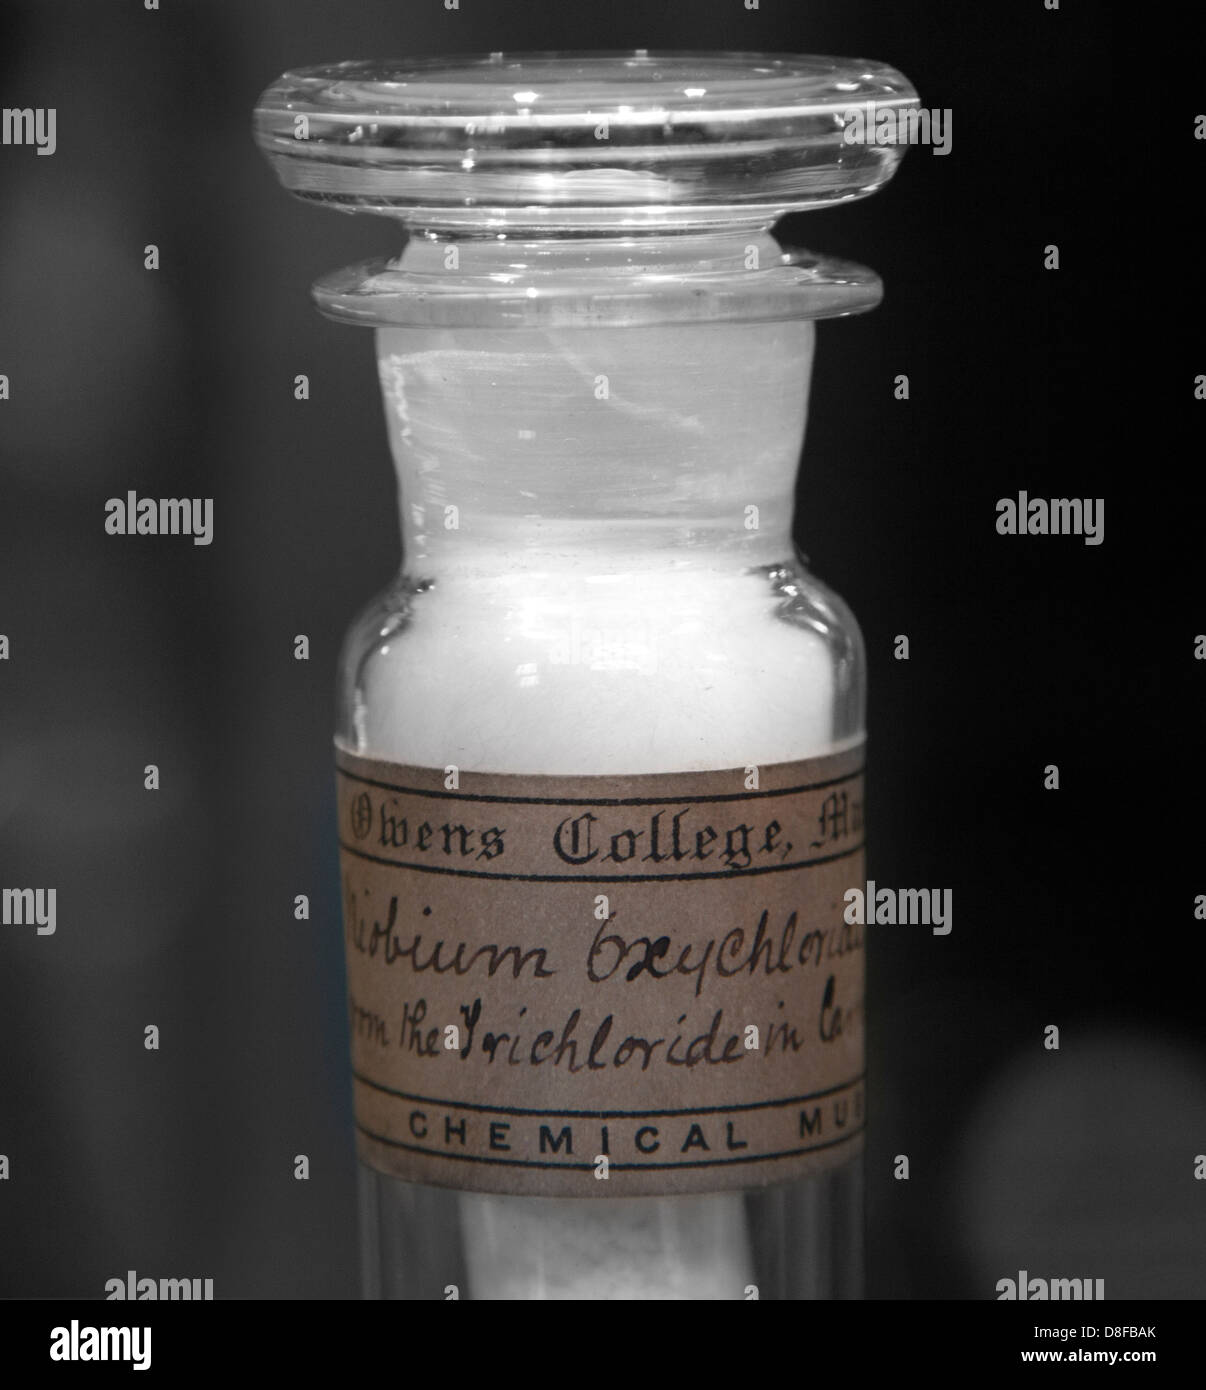 Glass bottle from a Victorian chemistry set containing a white chemical substance Stock Photo